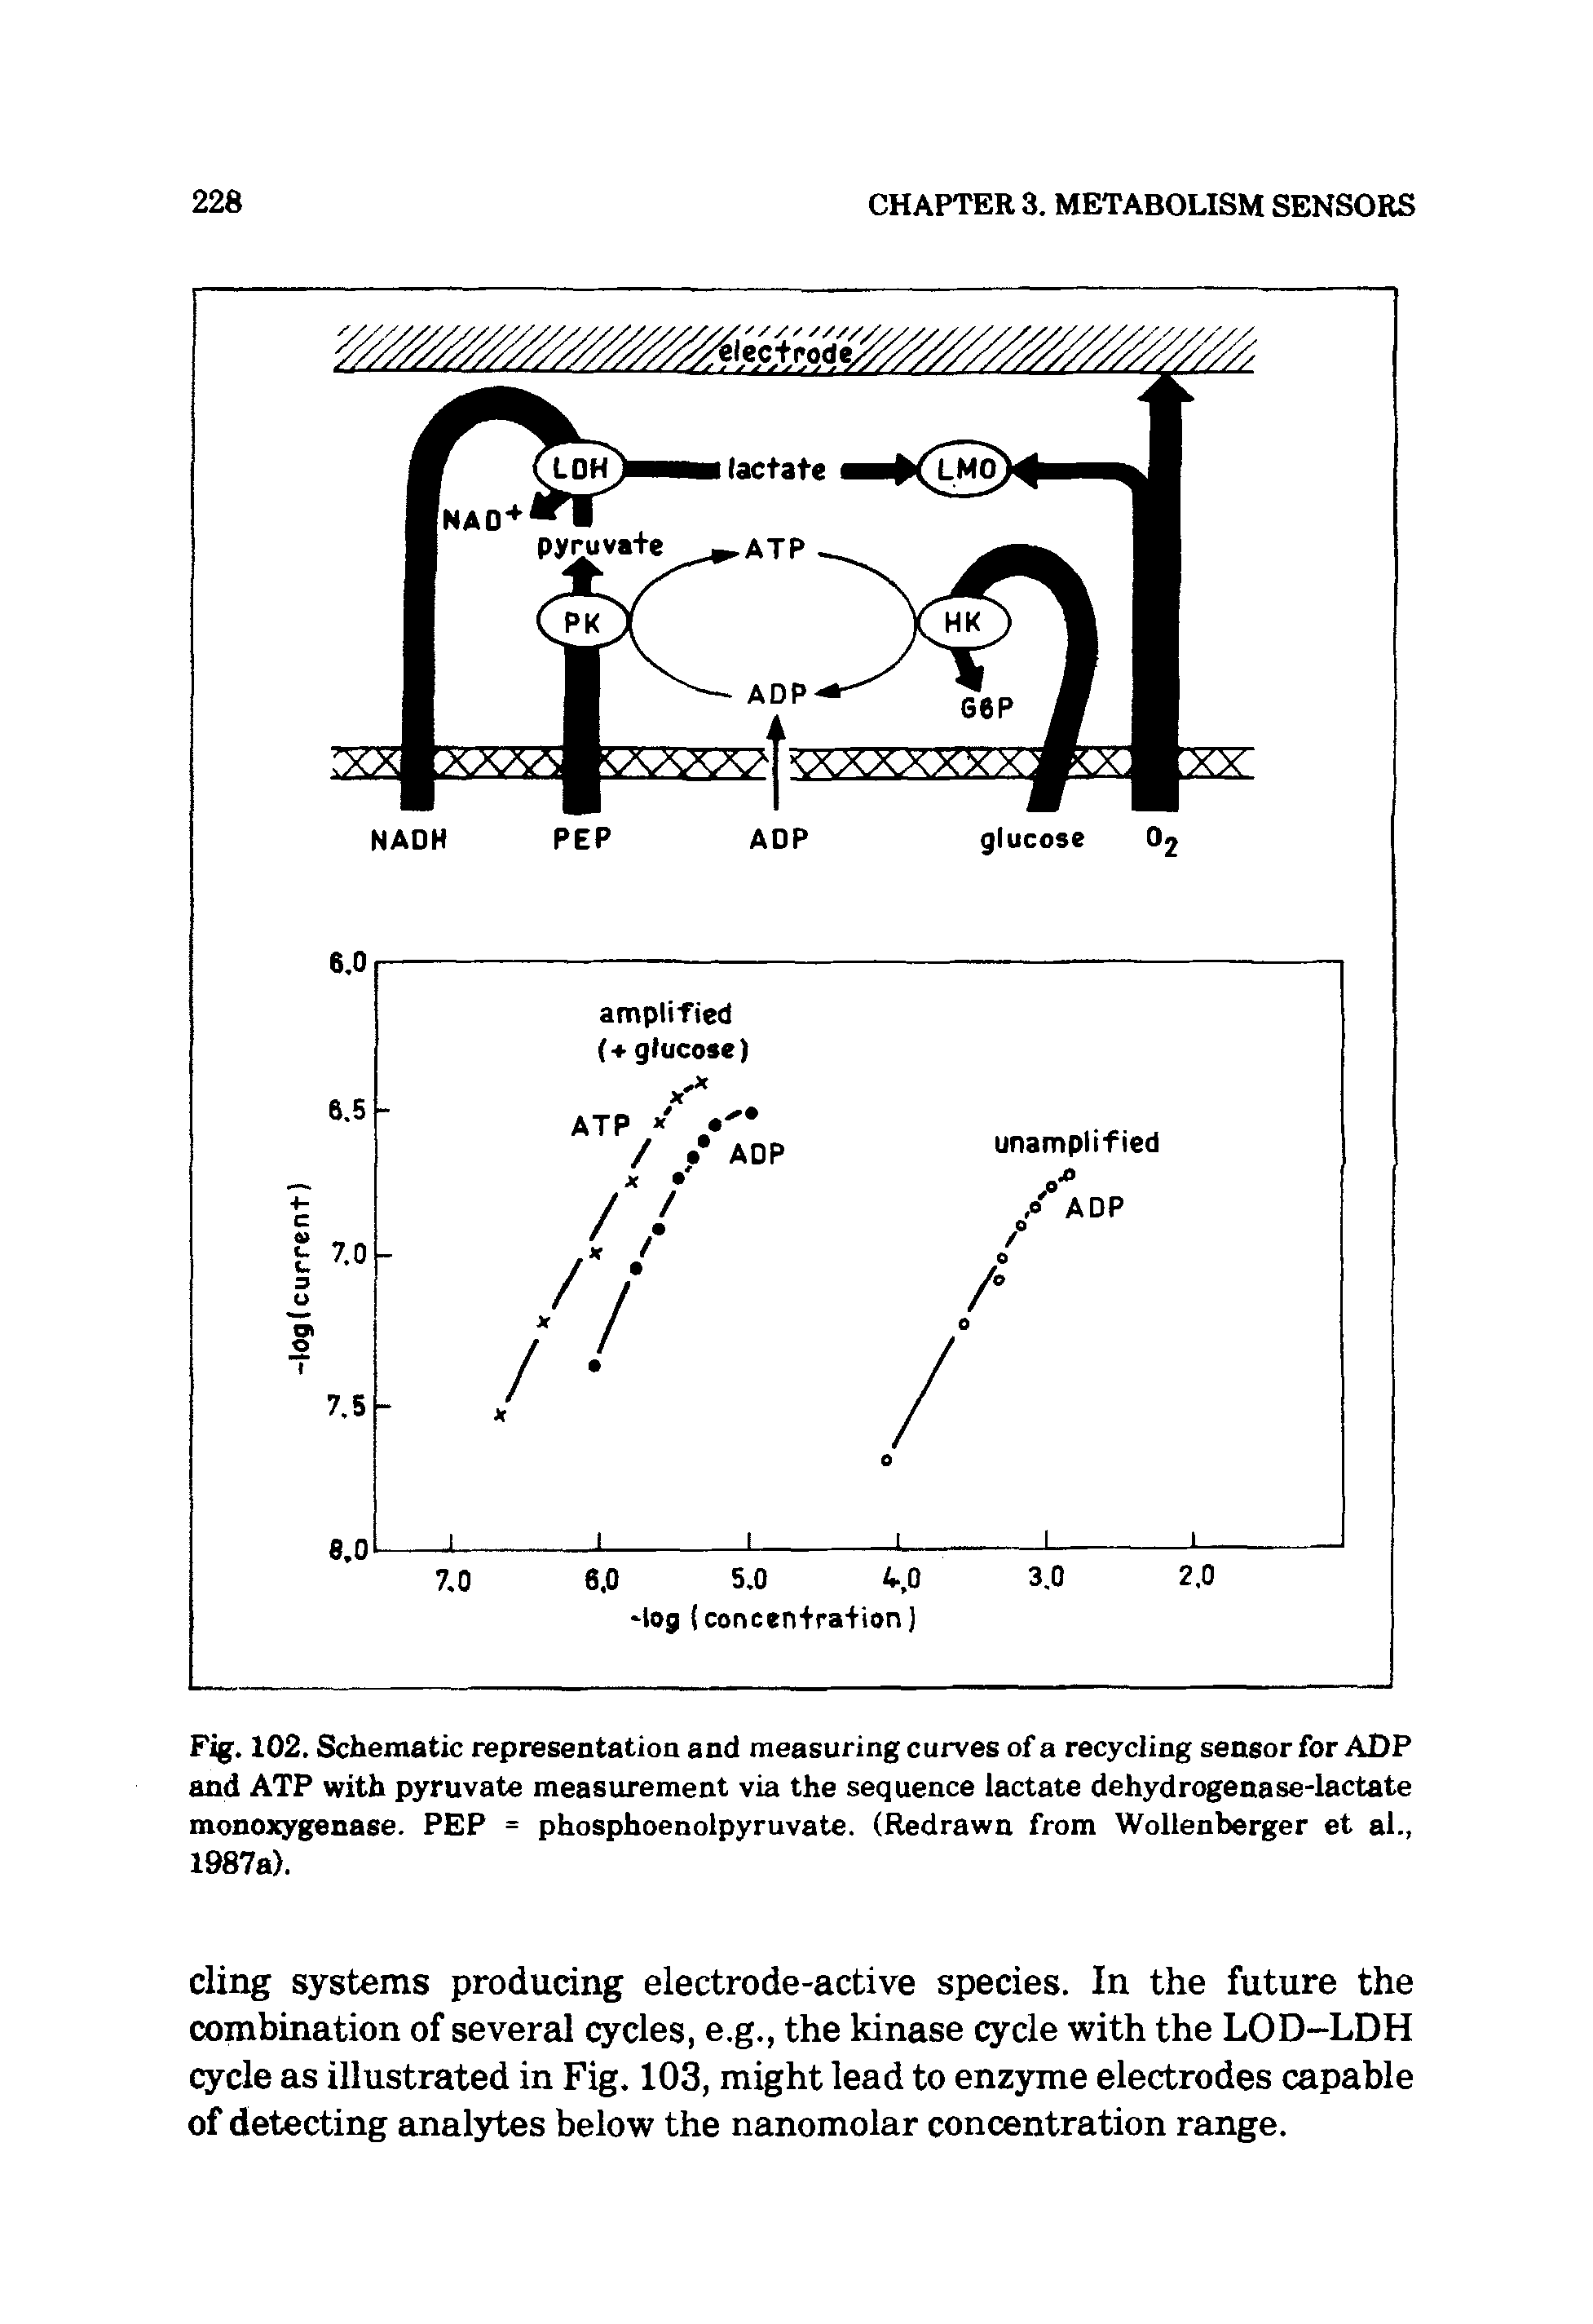 Fig. 102. Schematic representation and measuring curves of a recycling sensor for ADP and ATP with pyruvate measurement via the sequence lactate dehydrogenase-lactate monoxygenase. PEP = phosphoenolpyruvate. (Redrawn from Wollenberger et al., 1987a).